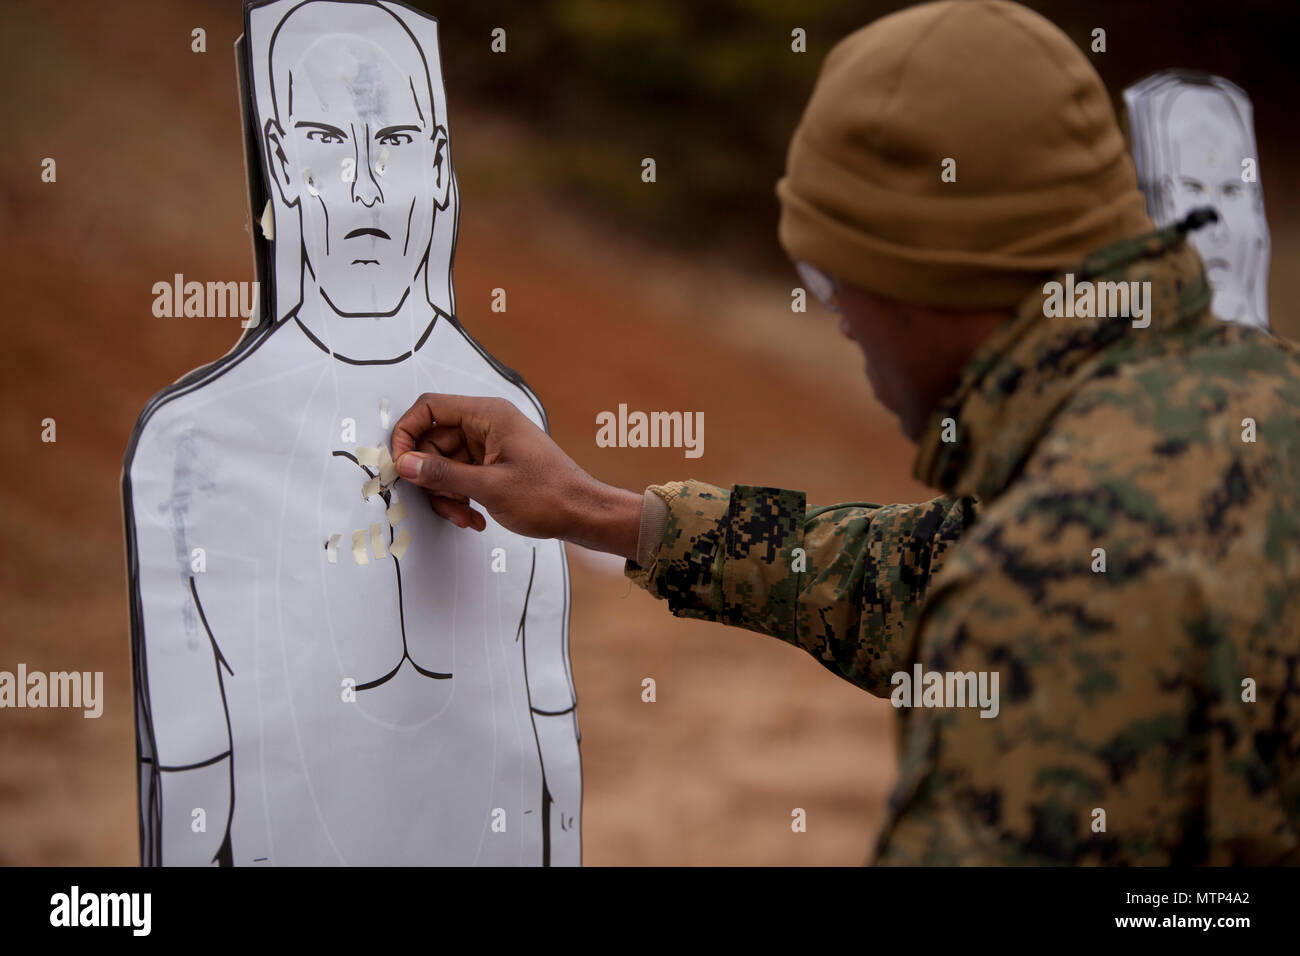 https://c8.alamy.com/comp/MTP4A2/us-marines-assigned-to-the-basic-school-pasties-up-his-target-after-conducting-the-combat-pistol-program-at-weapons-training-battalion-wtbn-aboard-mcb-quantico-va-jan-20-2017-the-purpose-of-wtbn-is-to-serve-as-the-marine-corps-proponent-for-all-facets-of-small-arms-combat-marksmanship-and-to-be-the-focal-point-for-marksmanship-doctrine-training-competition-equipment-and-weapons-us-marine-corps-photo-by-cpl-laura-mercado-MTP4A2.jpg